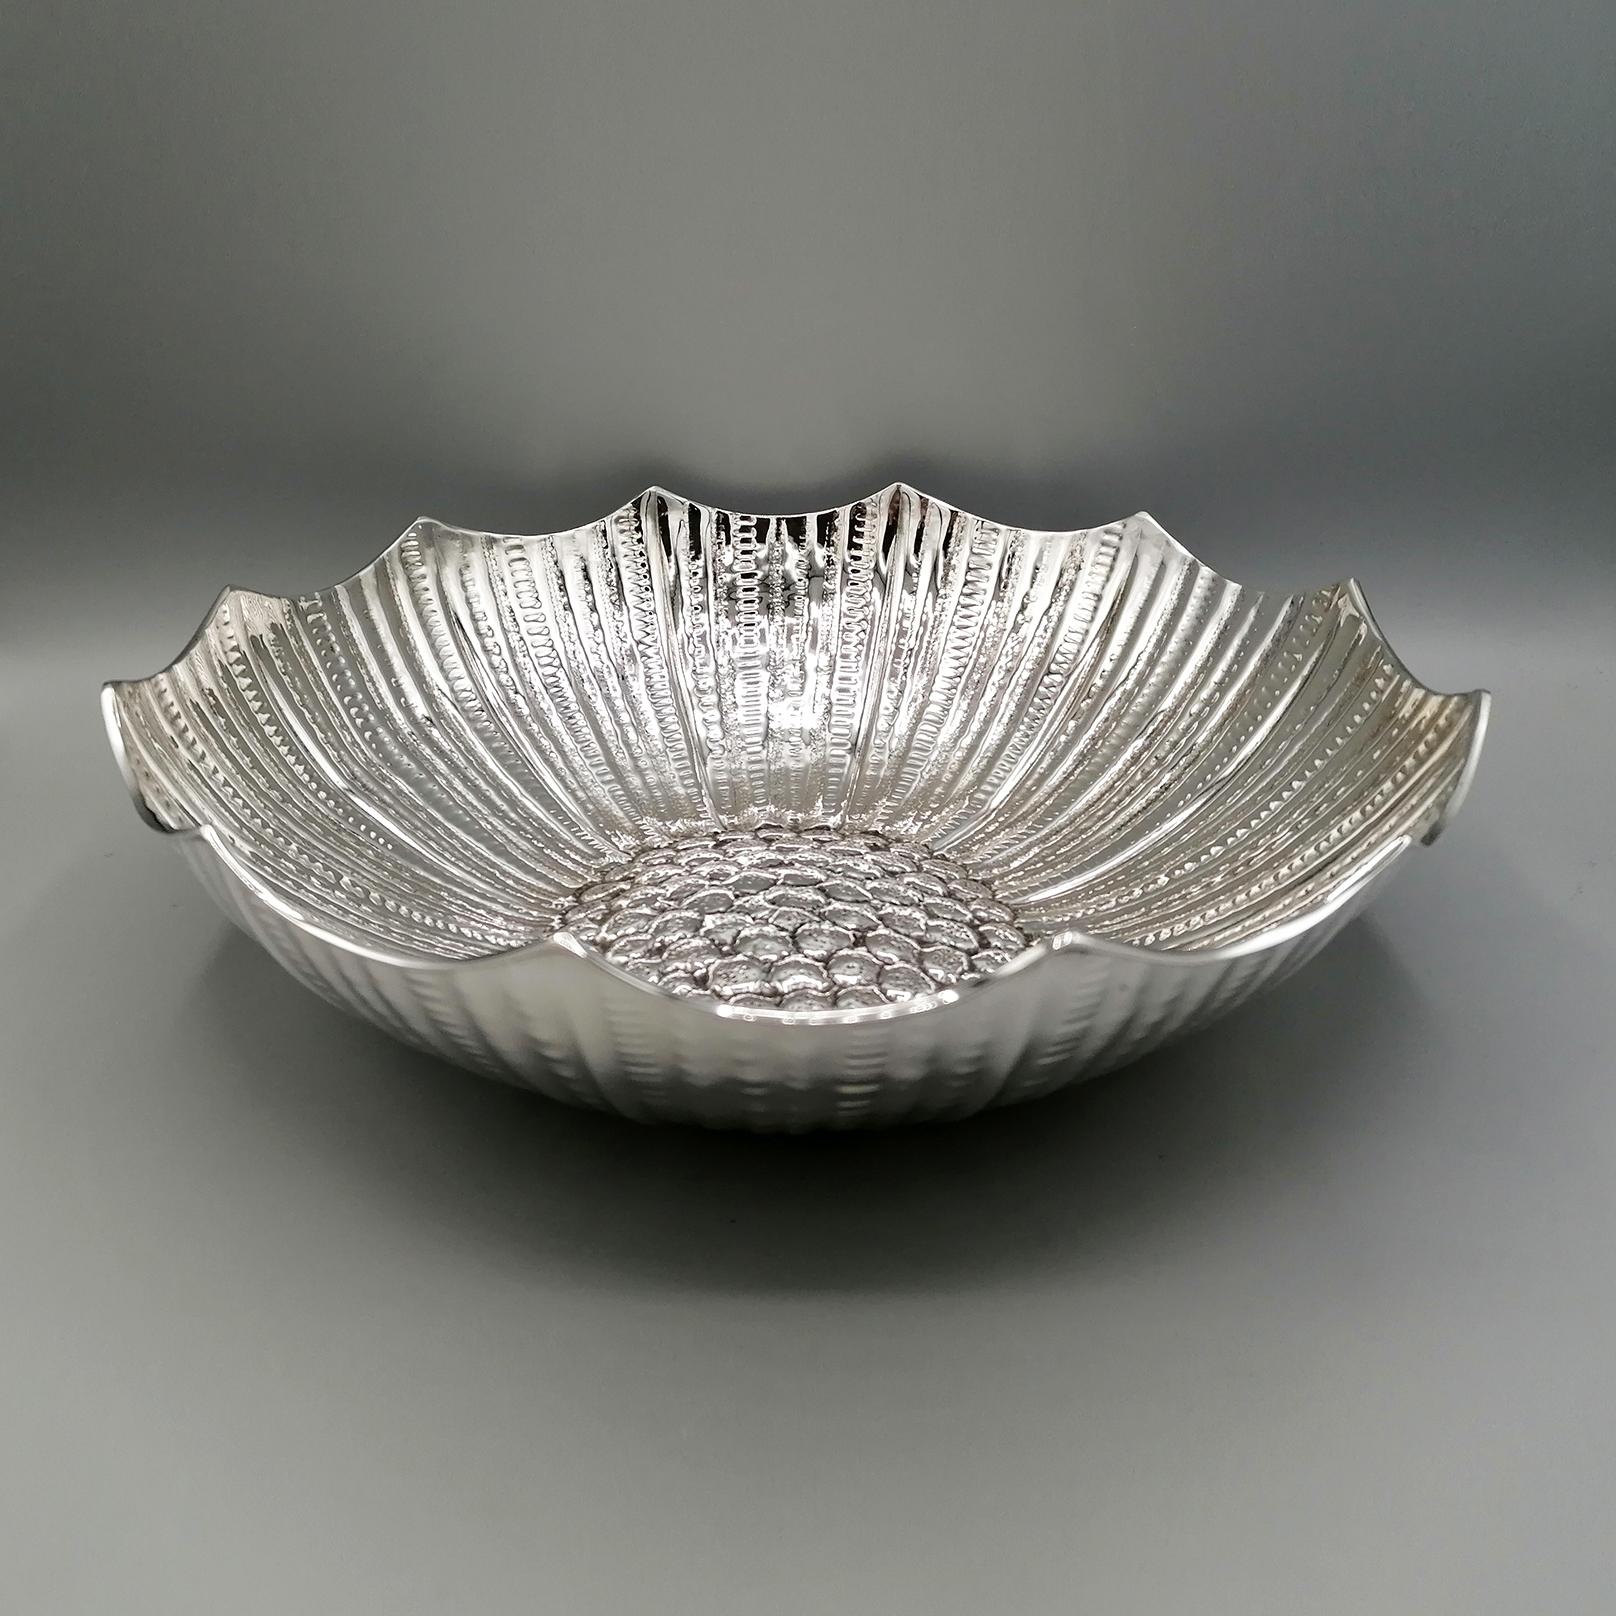 800 silver centerpiece completely handmade.
The piece was crafted from a solid silver plate and shaped in the shape of a flower.
The stamens, the petals and the entire corolla were embossed and then chiseled.
Subsequently the centerpiece was